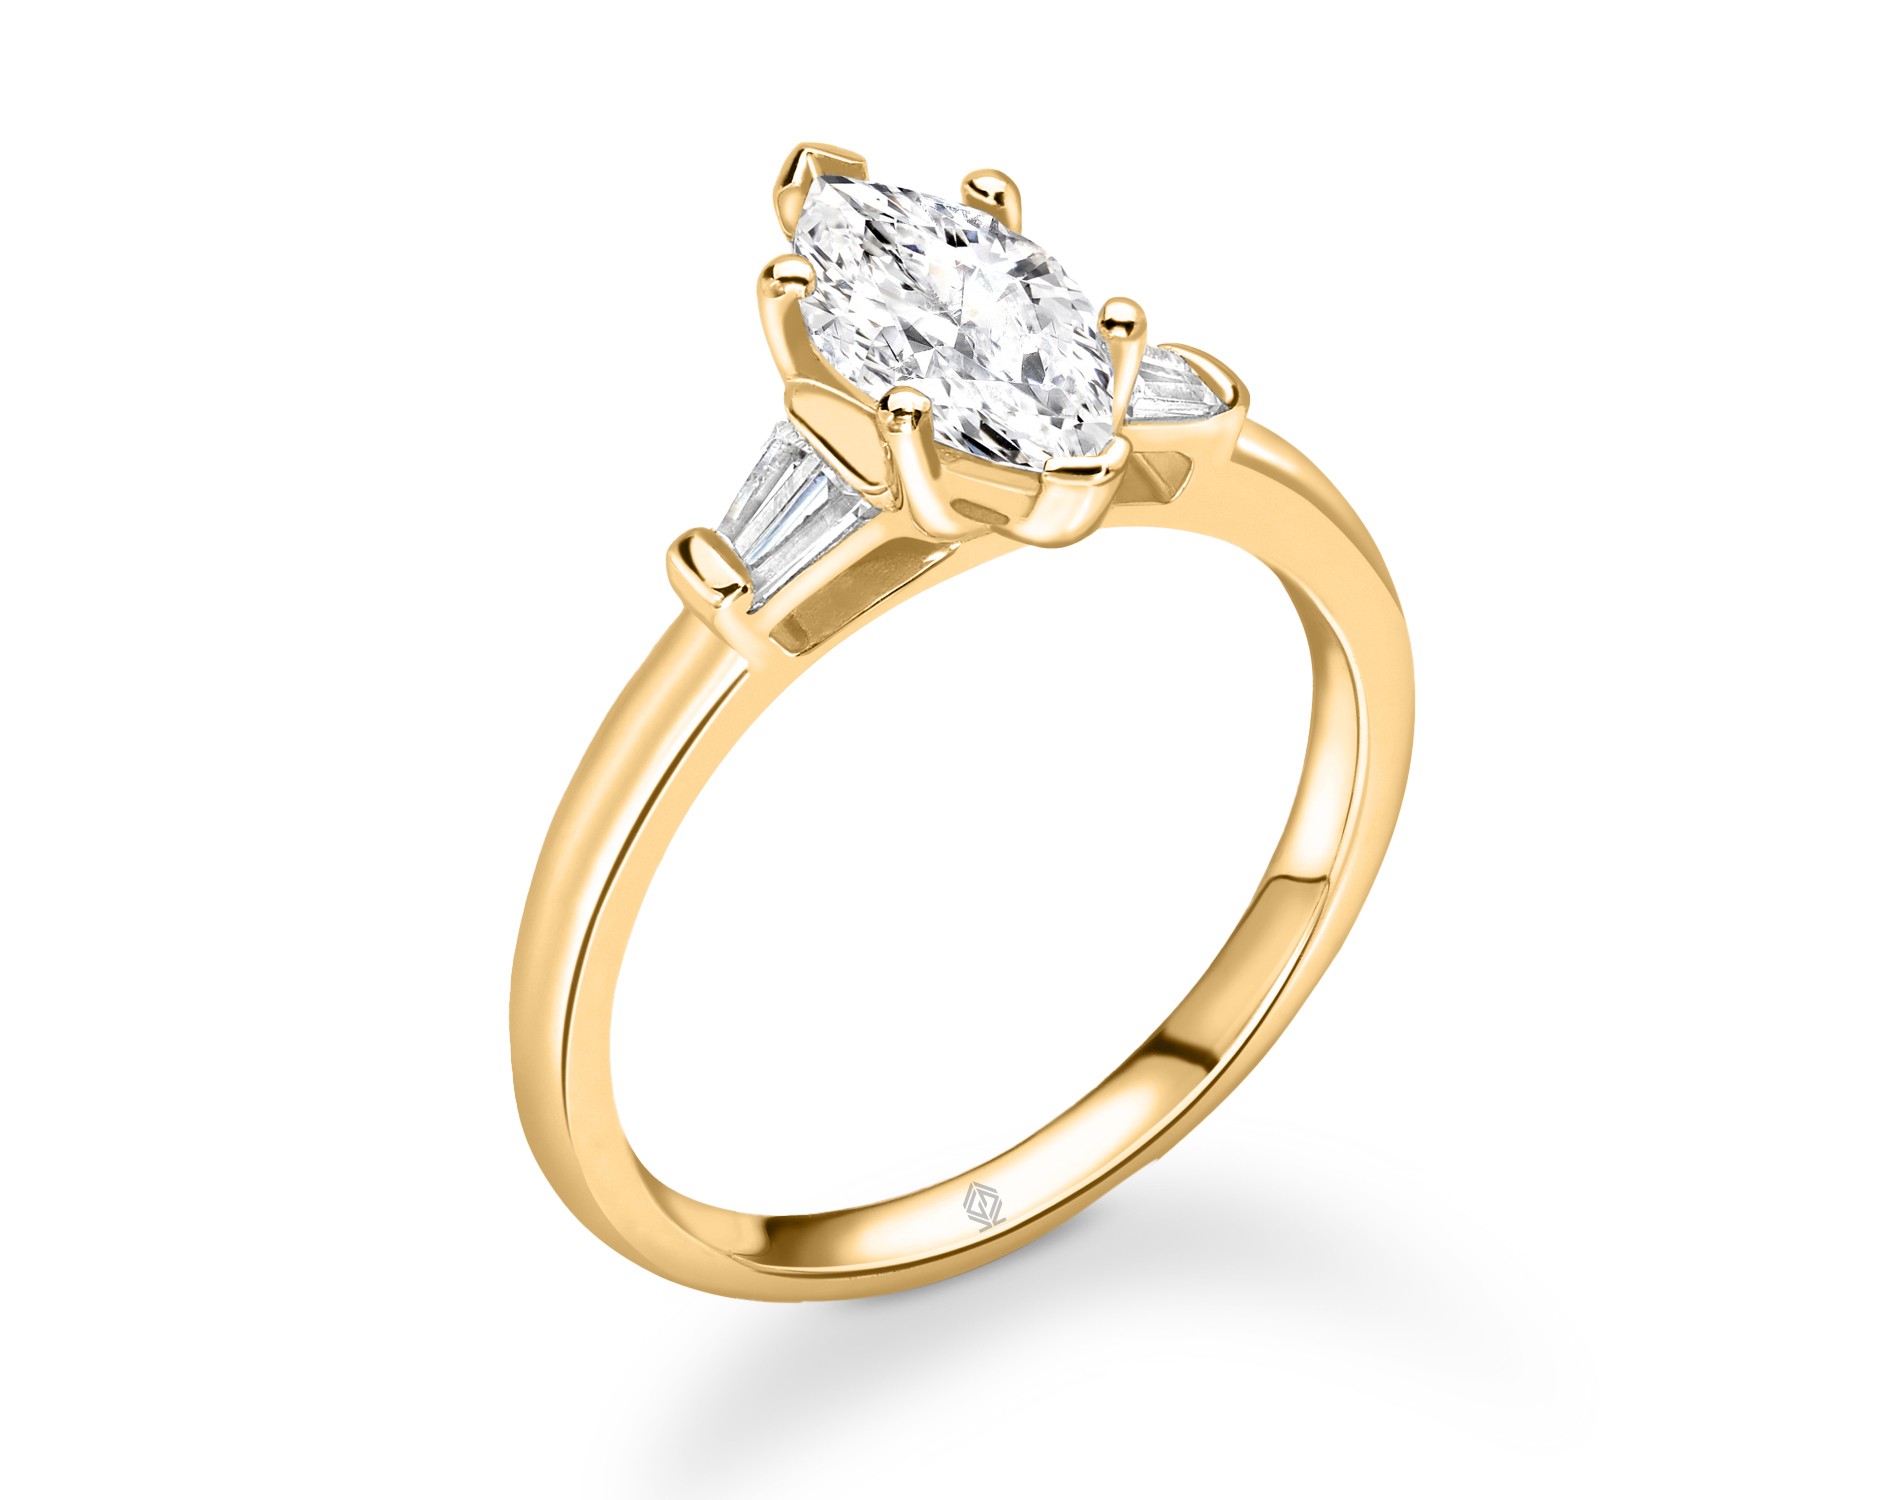 18K YELLOW GOLD MARQUISE CUT DIAMOND ENGAGEMENT RING WITH BAGUETTES CUT SIDE STONES